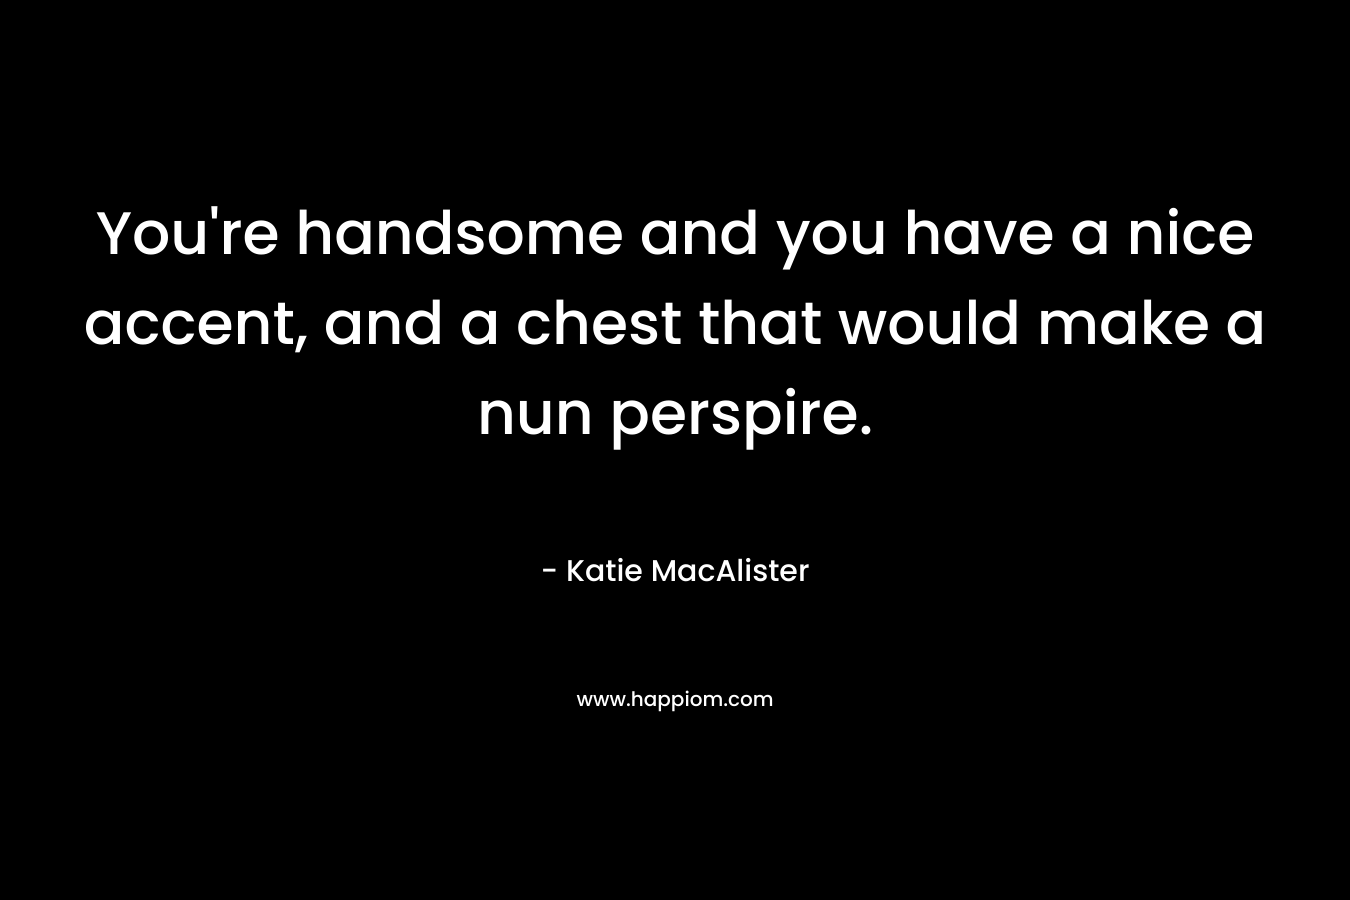 You’re handsome and you have a nice accent, and a chest that would make a nun perspire. – Katie MacAlister